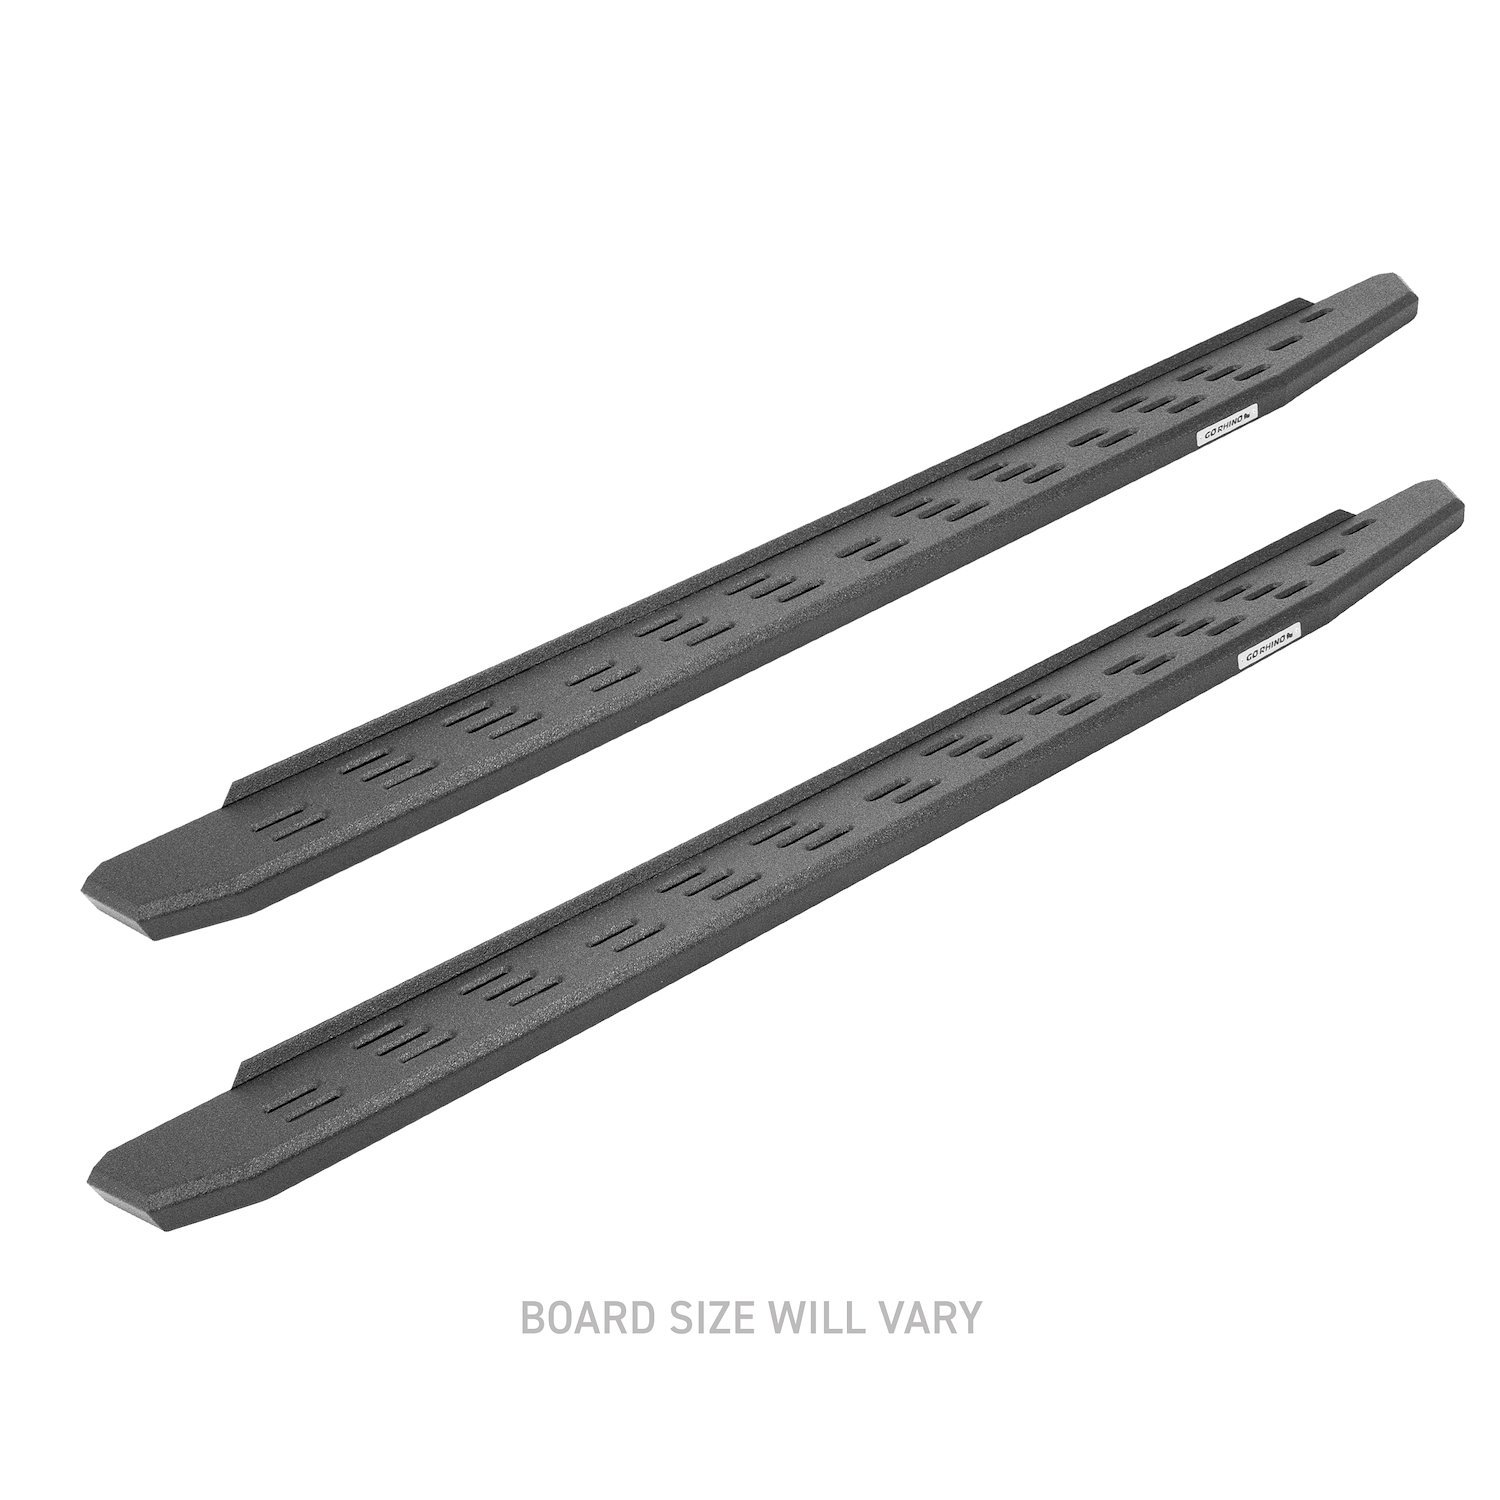 RB30 Running Boards w/Bracket Kit Fits Select Ford F-250/F-350 Super-Duty Crew Cab [Bedliner-Coated]